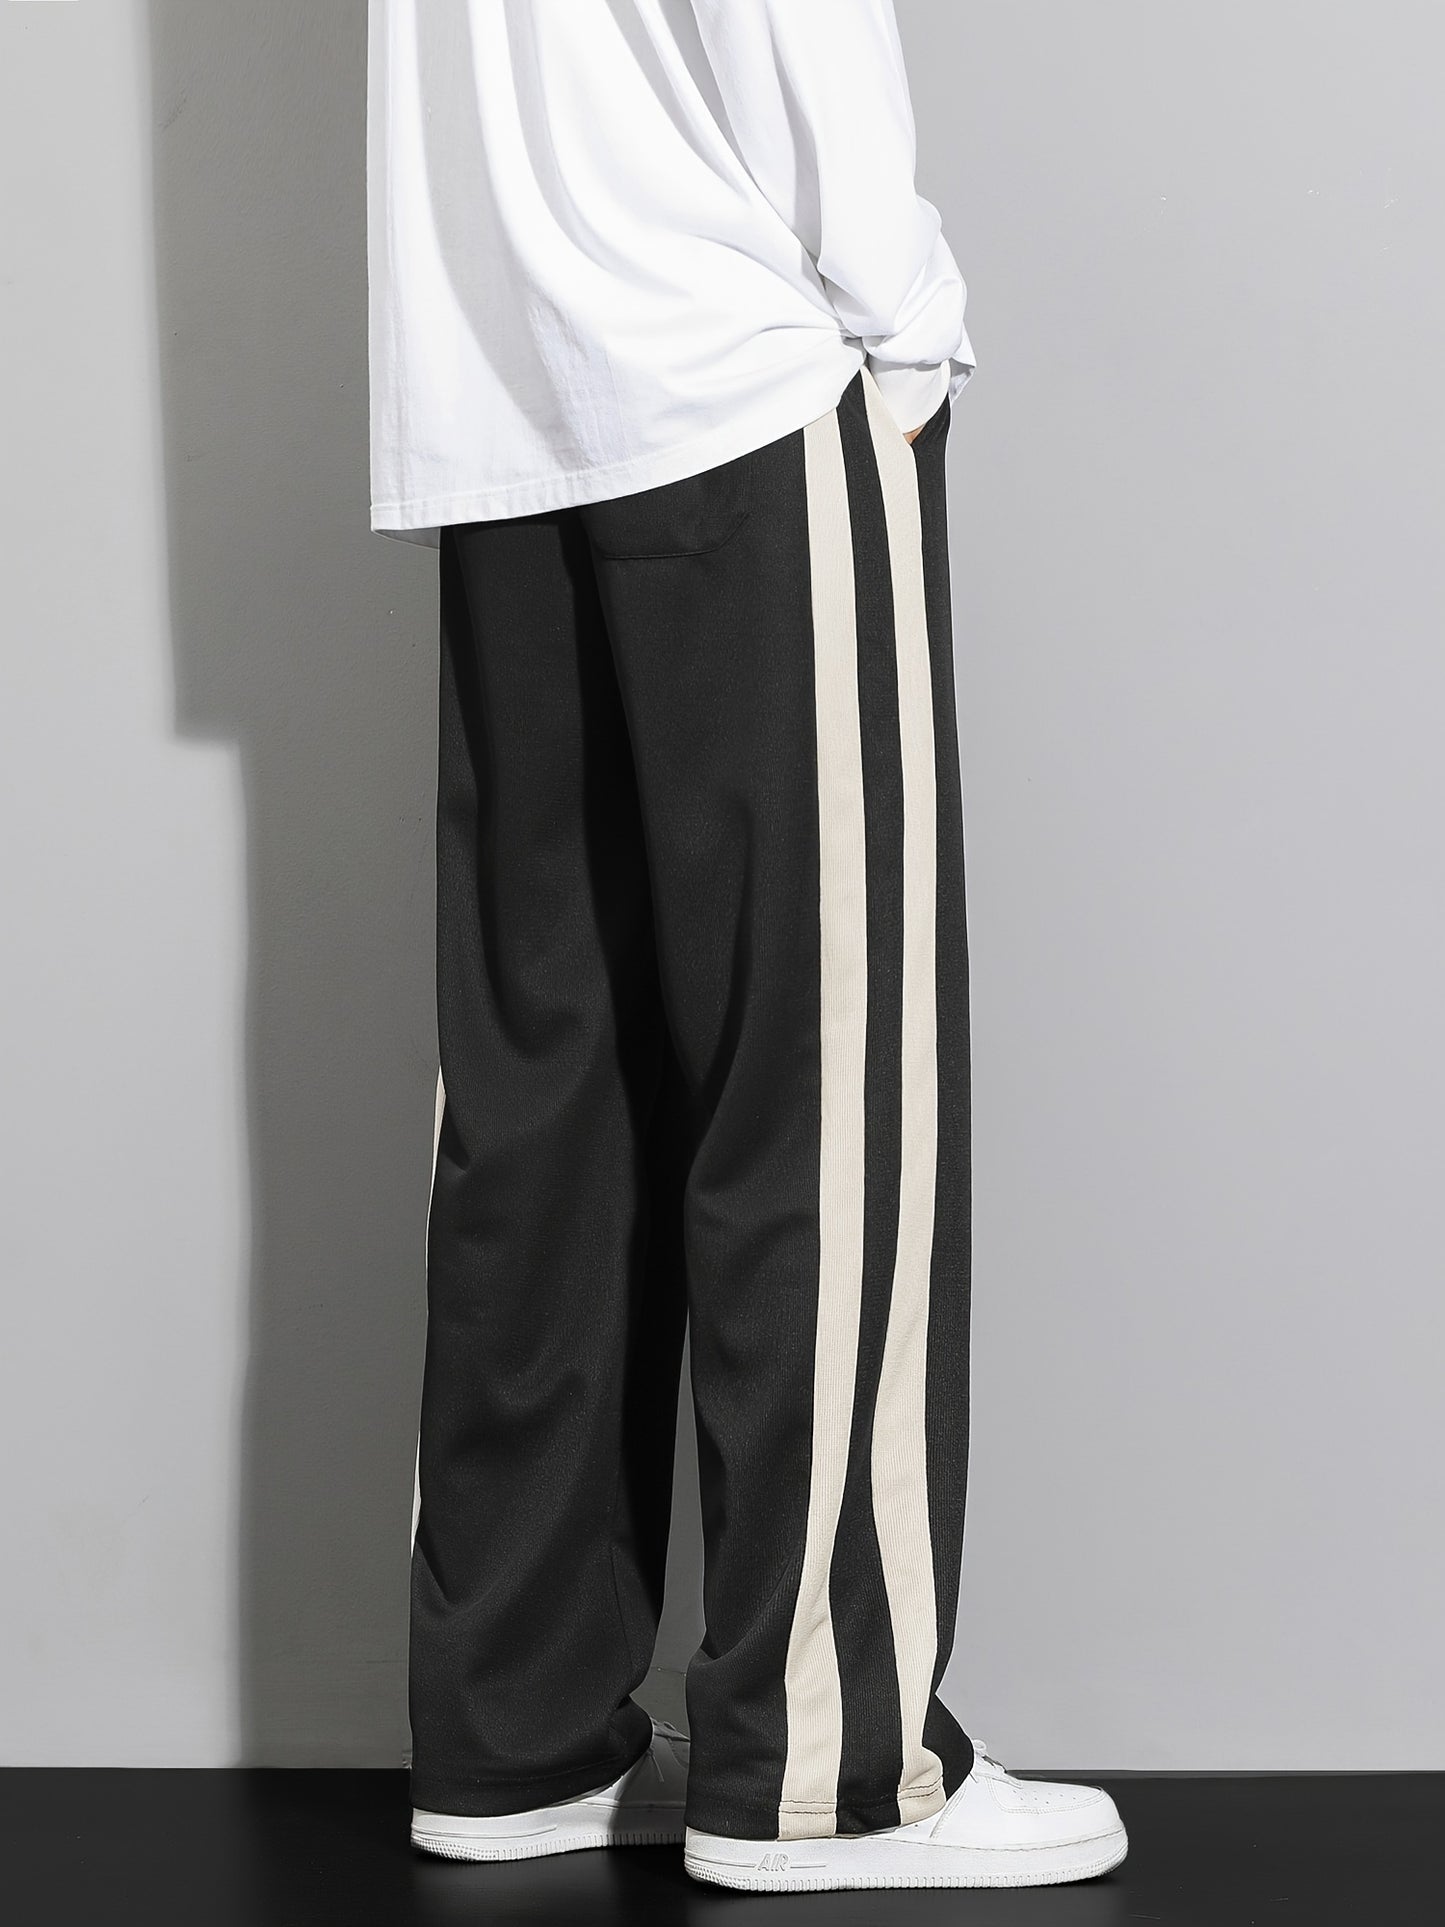 Men's Stylish Loose Stripe Pattern Pants With Pockets, Casual Breathable Drawstring Trousers For City Walk Street Hanging Outdoor Activities